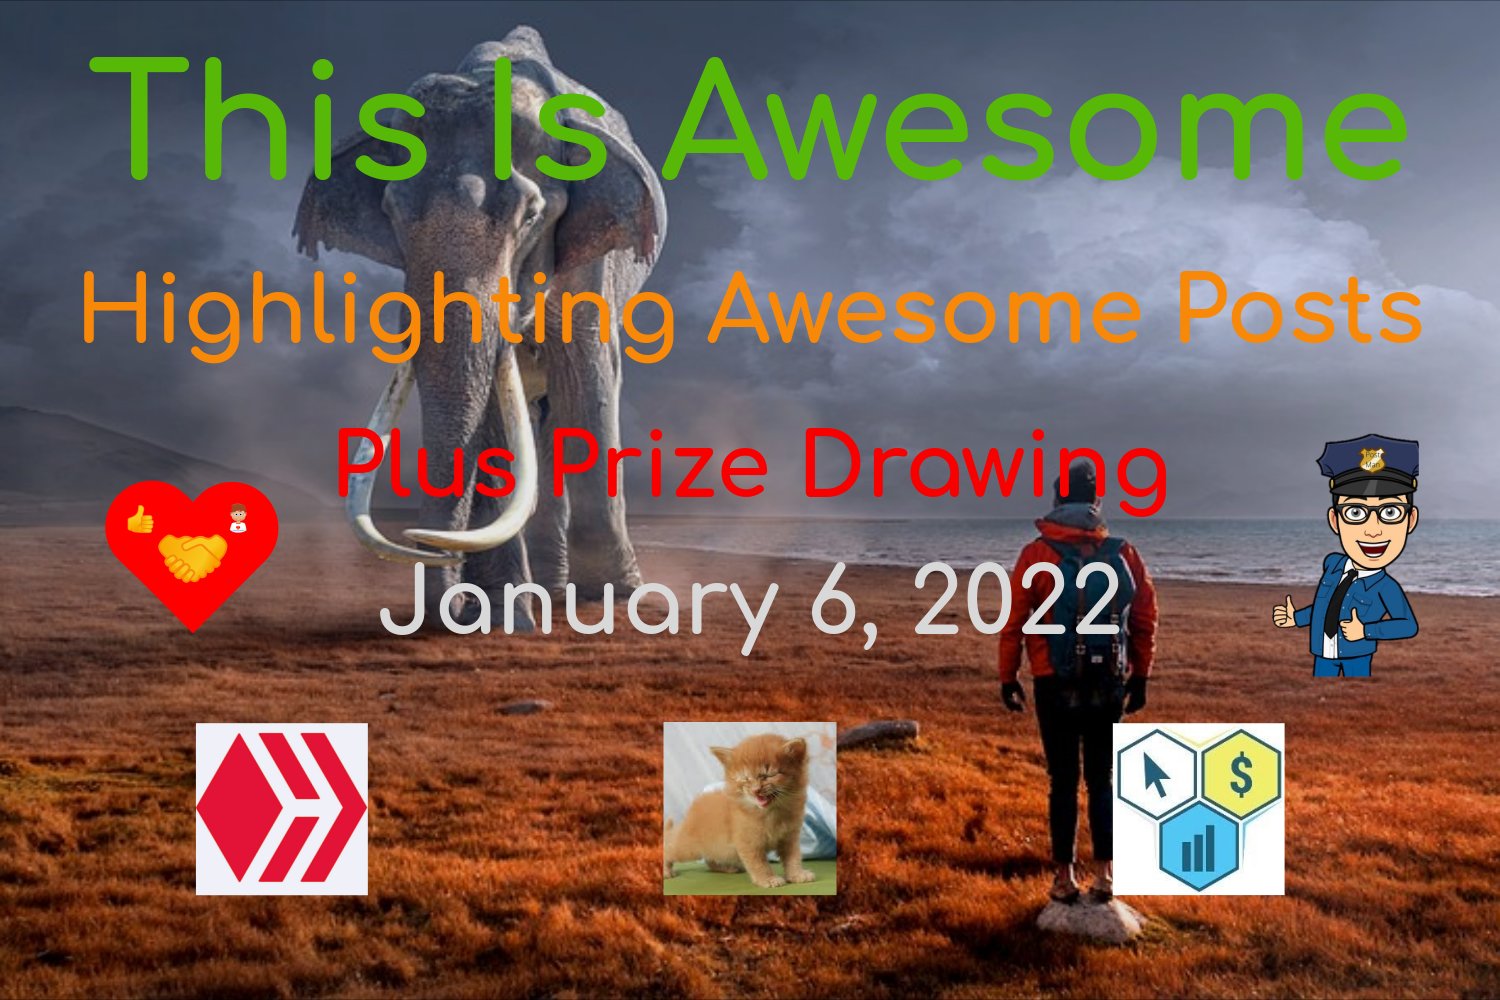 @thisisawesome/this-is-awesome-highlighting-awesome-posts-plus-prize-drawing-january-6-2022